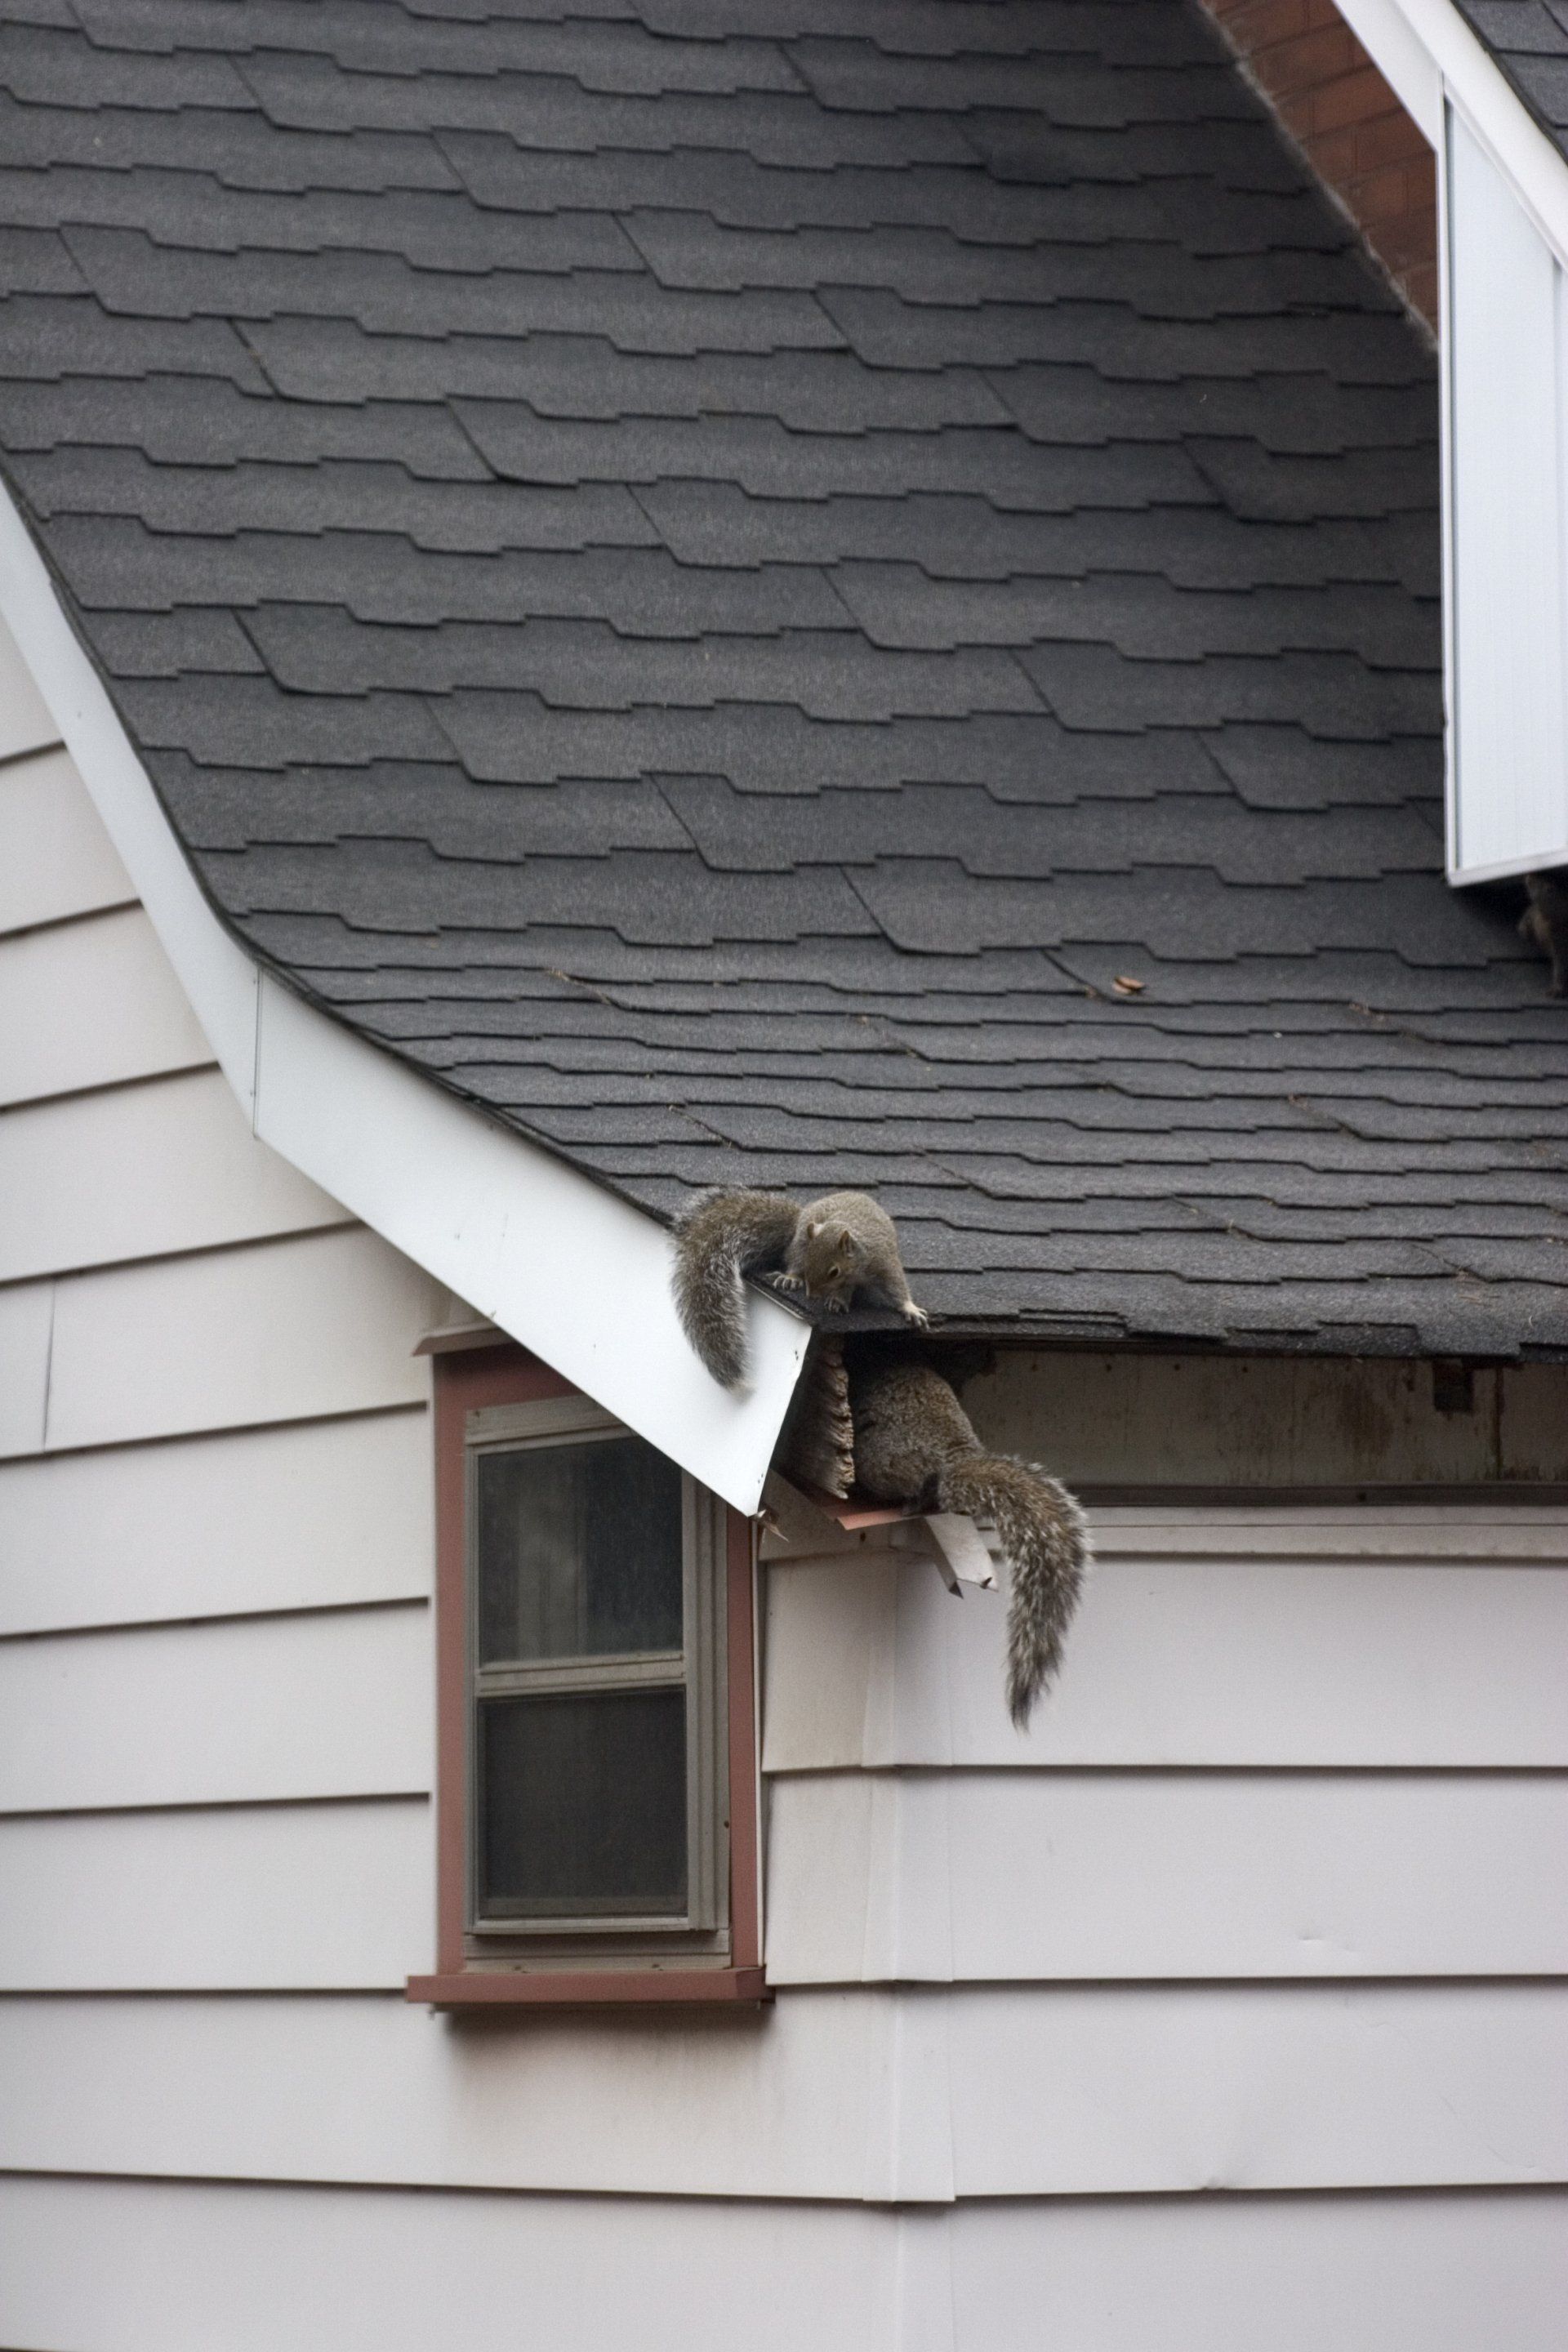 Wildlife Removal Services in New York